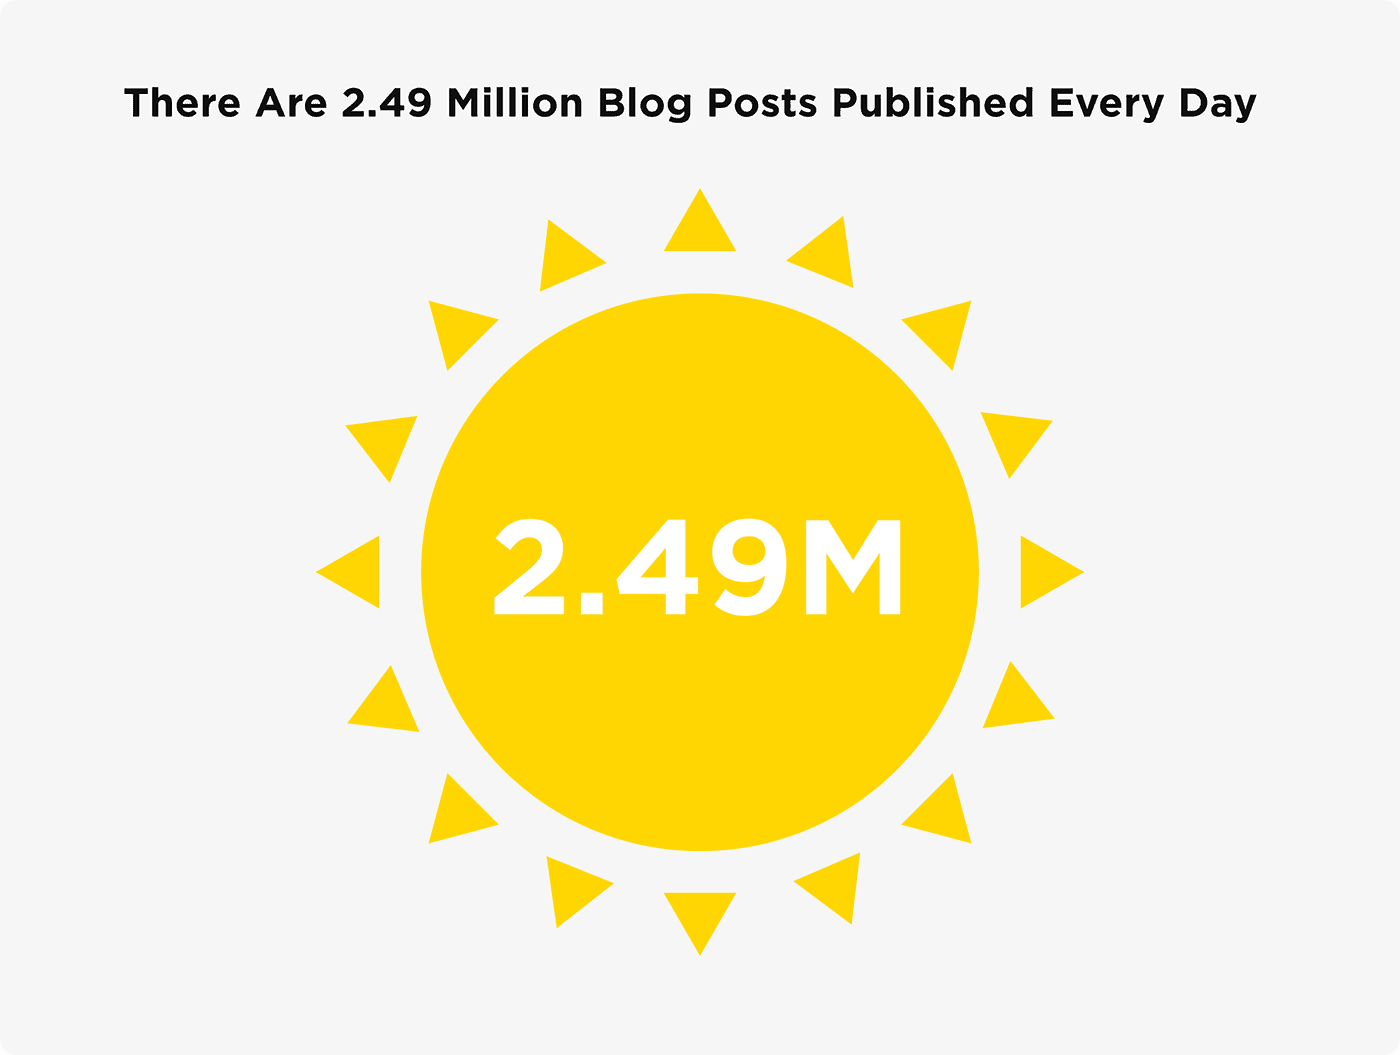 There are 2.49 million blog posts published every day